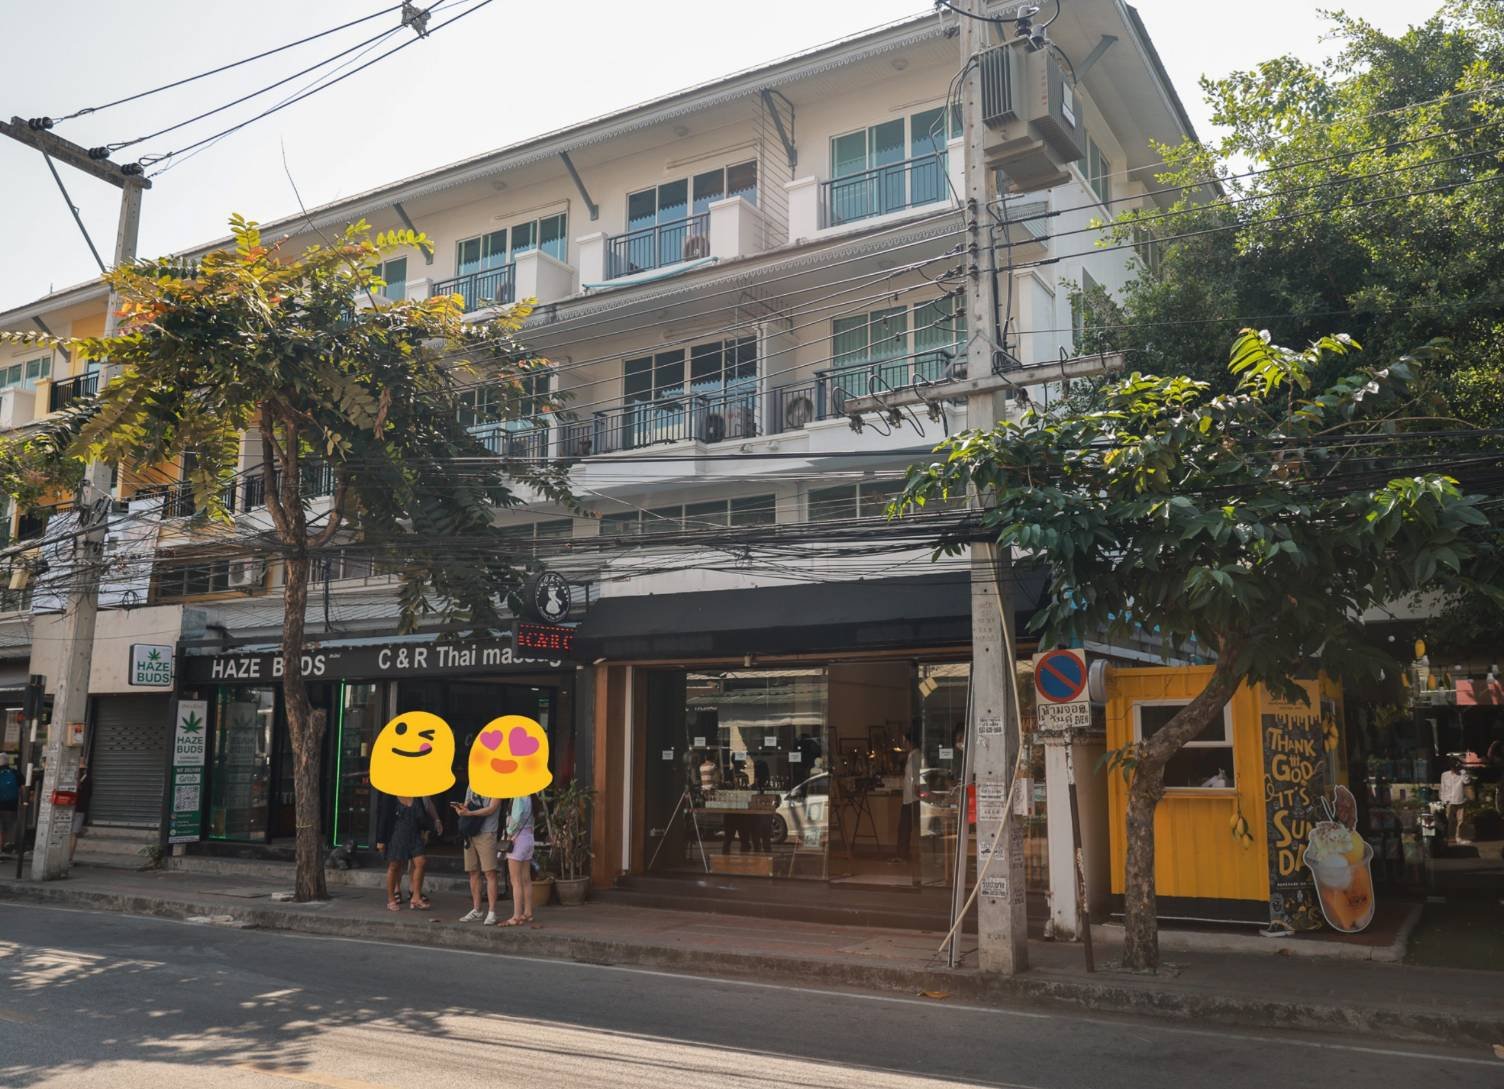 Rare Shophouse for sale corner unit Next to Ratchadamnoen Road In the heart of Sunday Walking Street (Walking Street), through Tha Phae Road, a prime location in Chiang Mai.